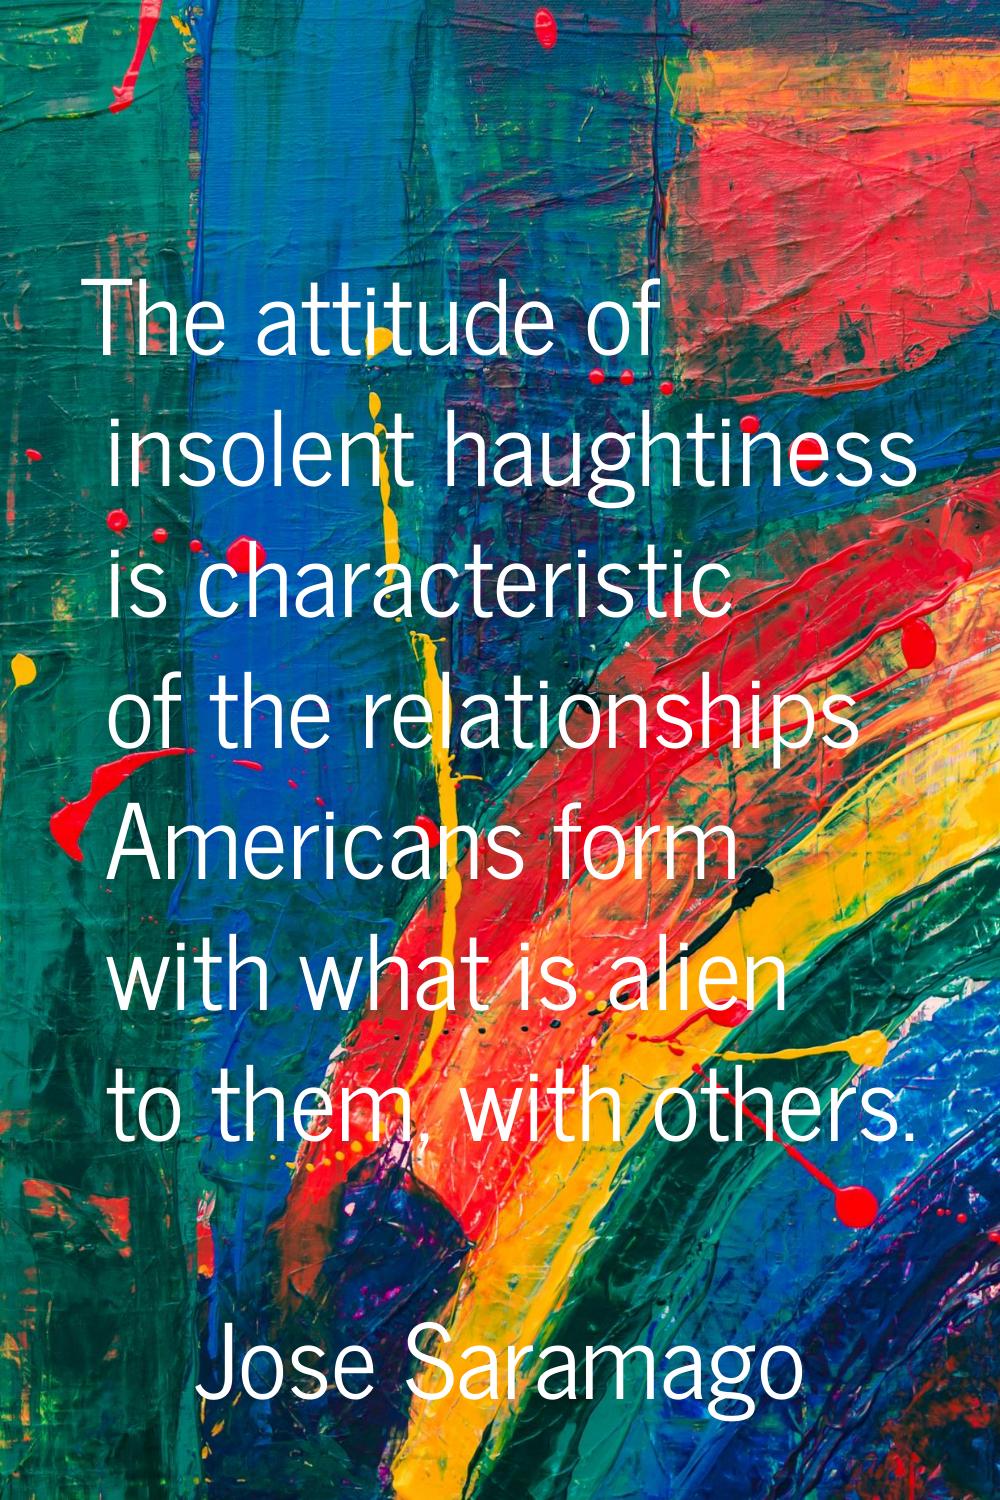 The attitude of insolent haughtiness is characteristic of the relationships Americans form with wha